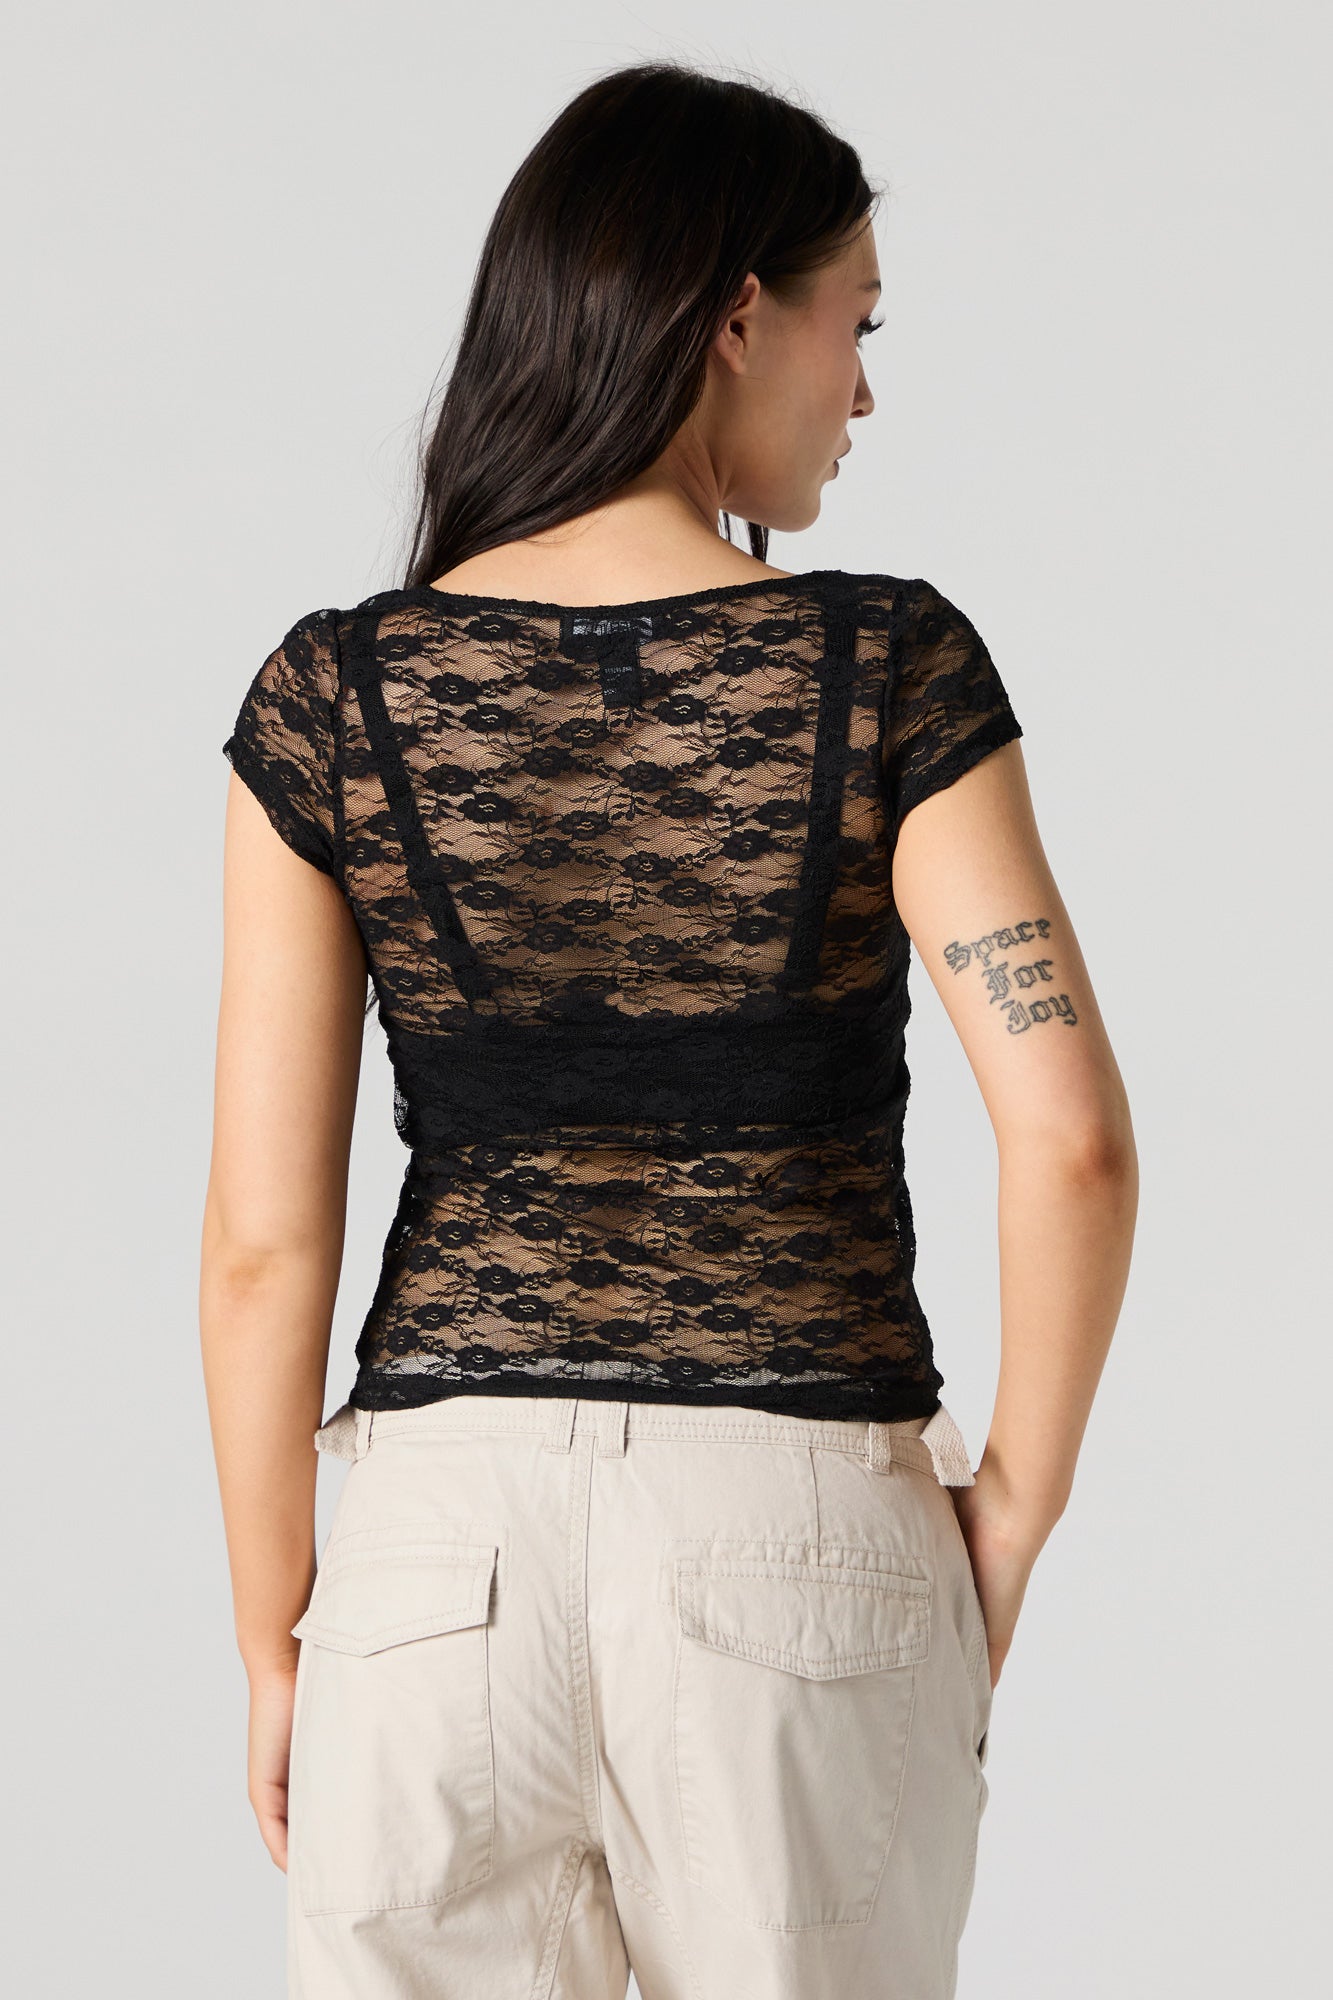 Sheer Floral Lace Scoop Neck Top